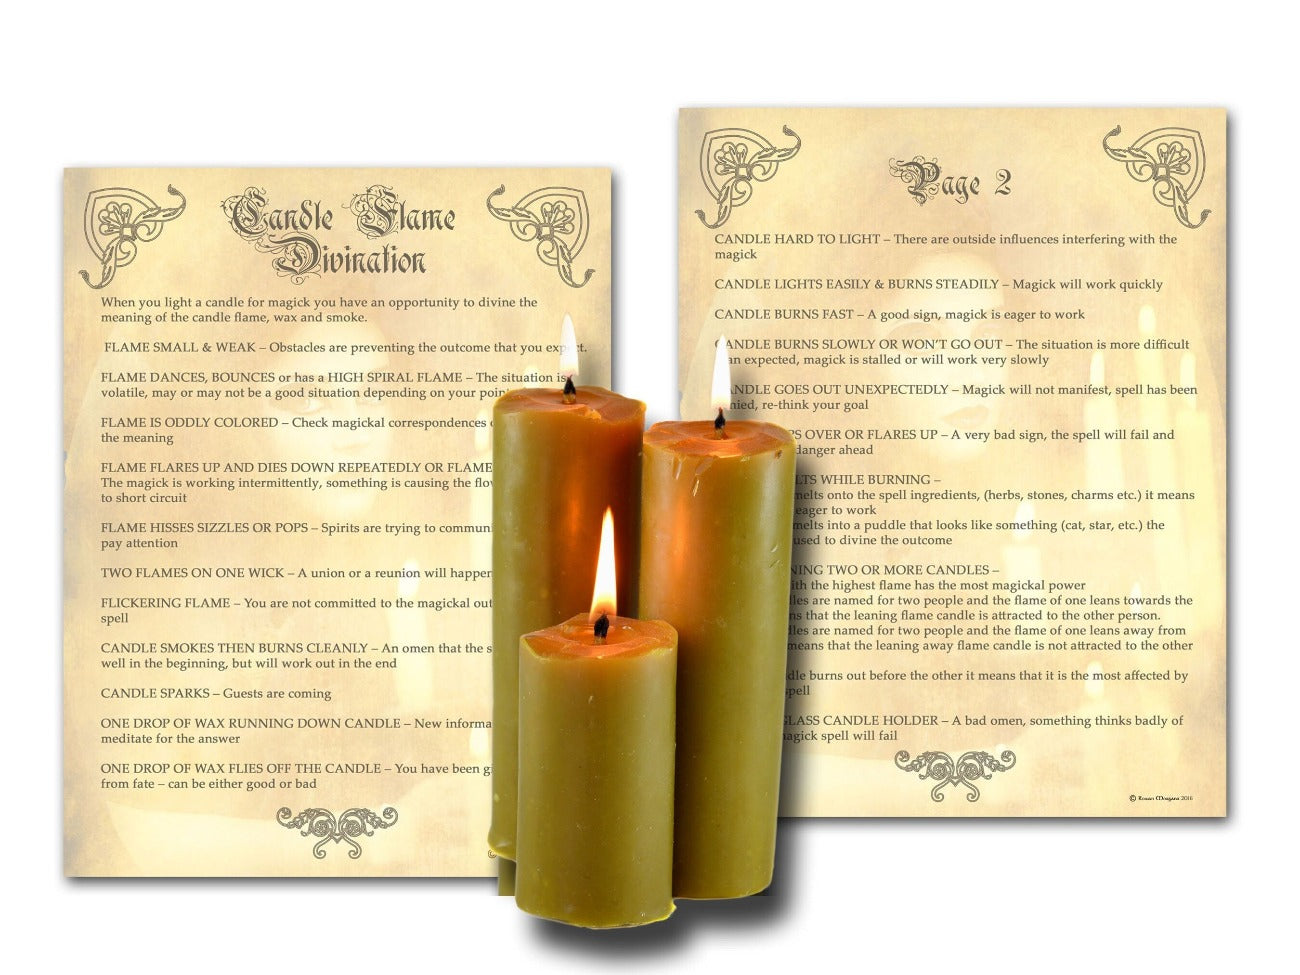 CANDLE FLAME DIVINATION 2 Pages, Witchcraft Candle Burning, Guttering Flickering Candle Flame Meaning, Wicca Candle Magic Dancing Fire Signs - Morgana Magick Spell